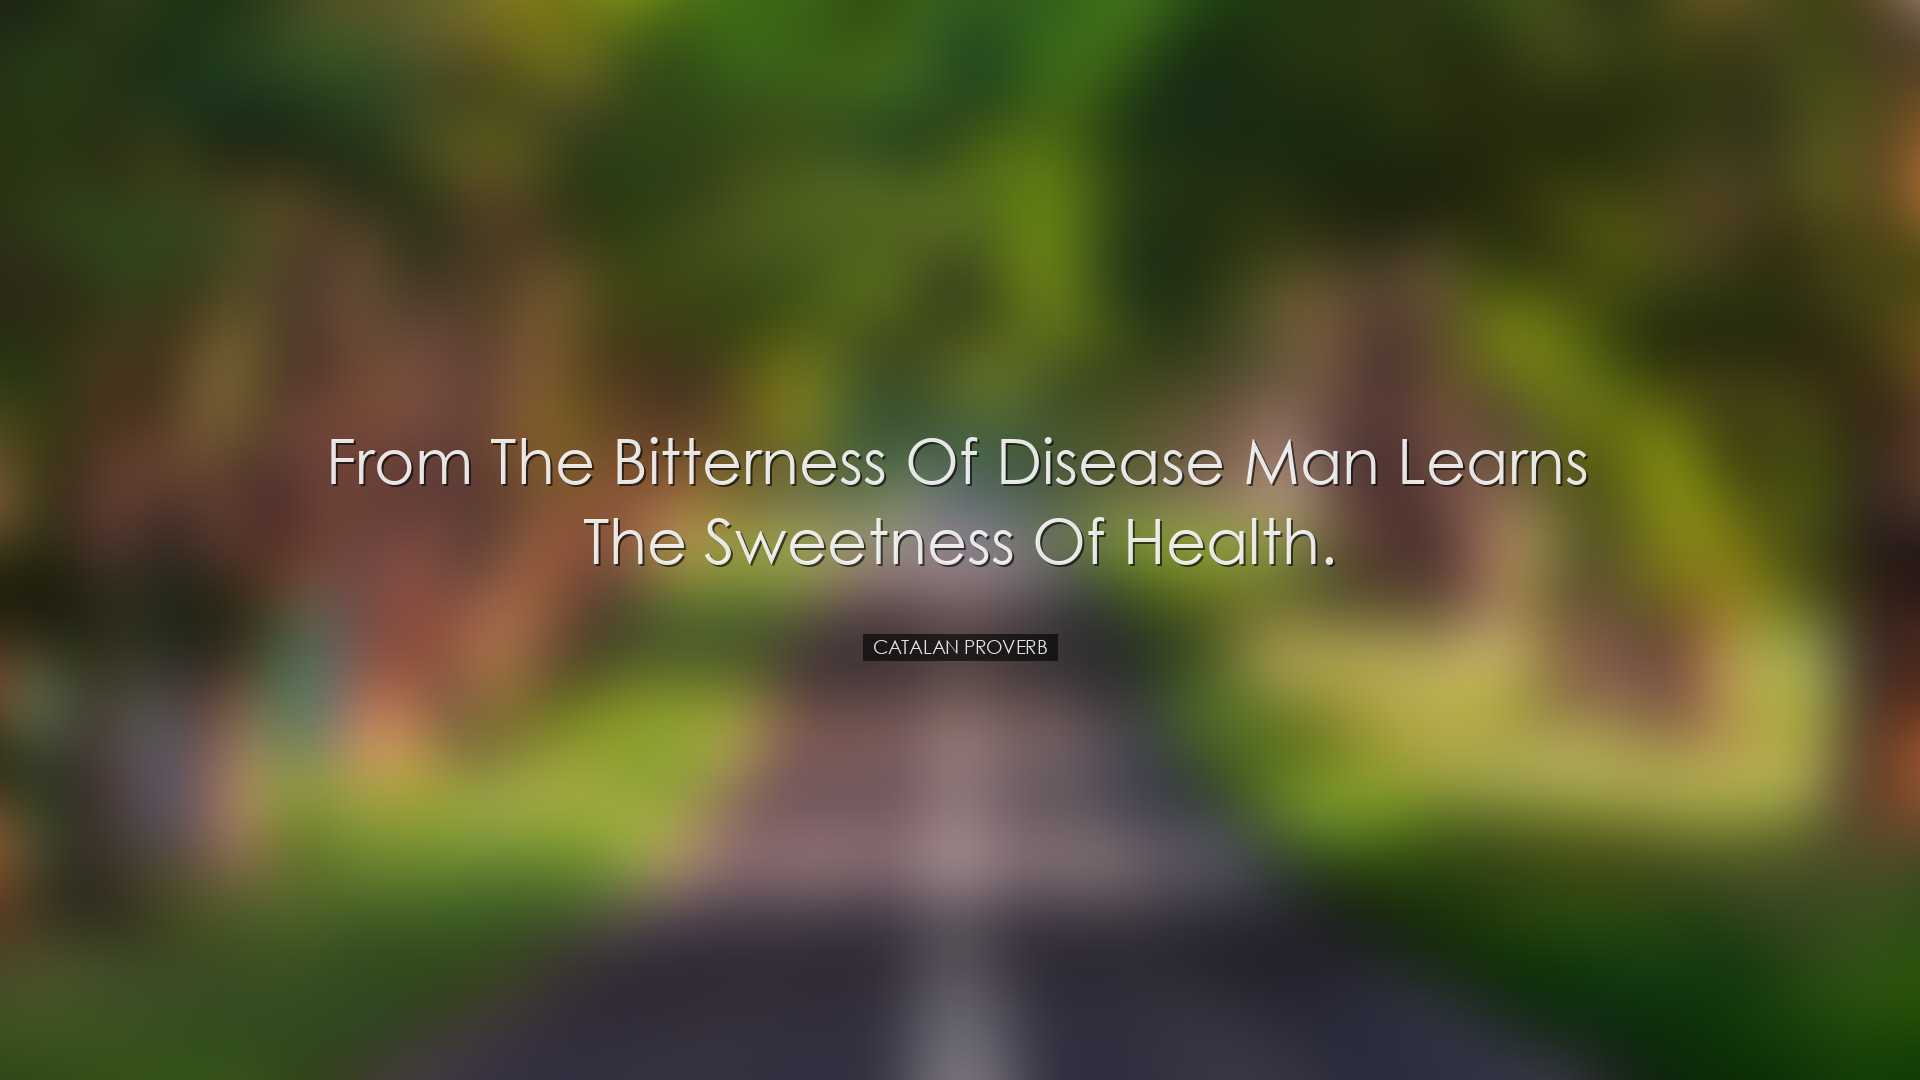 From the bitterness of disease man learns the sweetness of health.